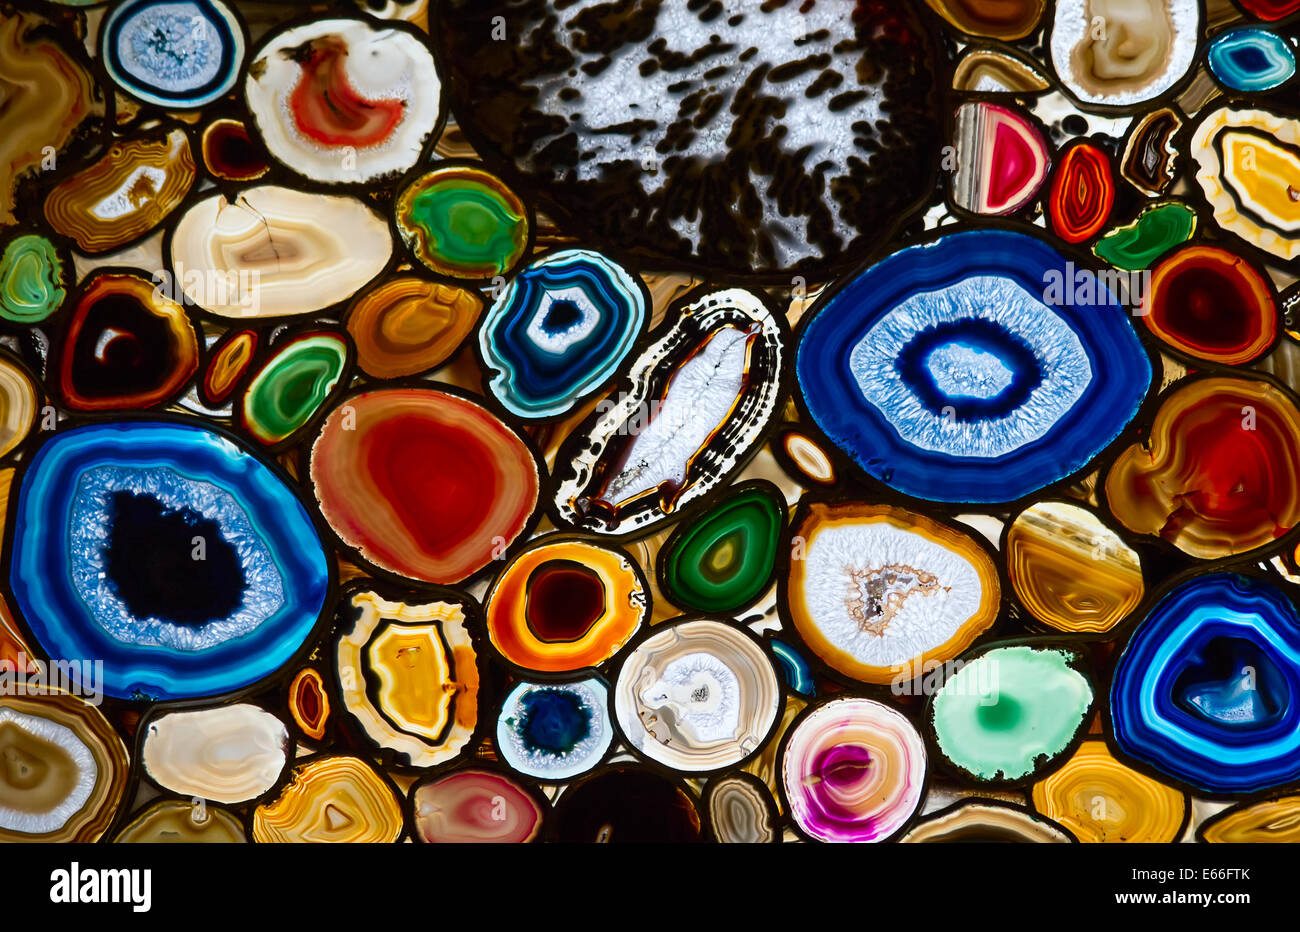 Translucent mosaic made with slices of agate stone Stock Photo